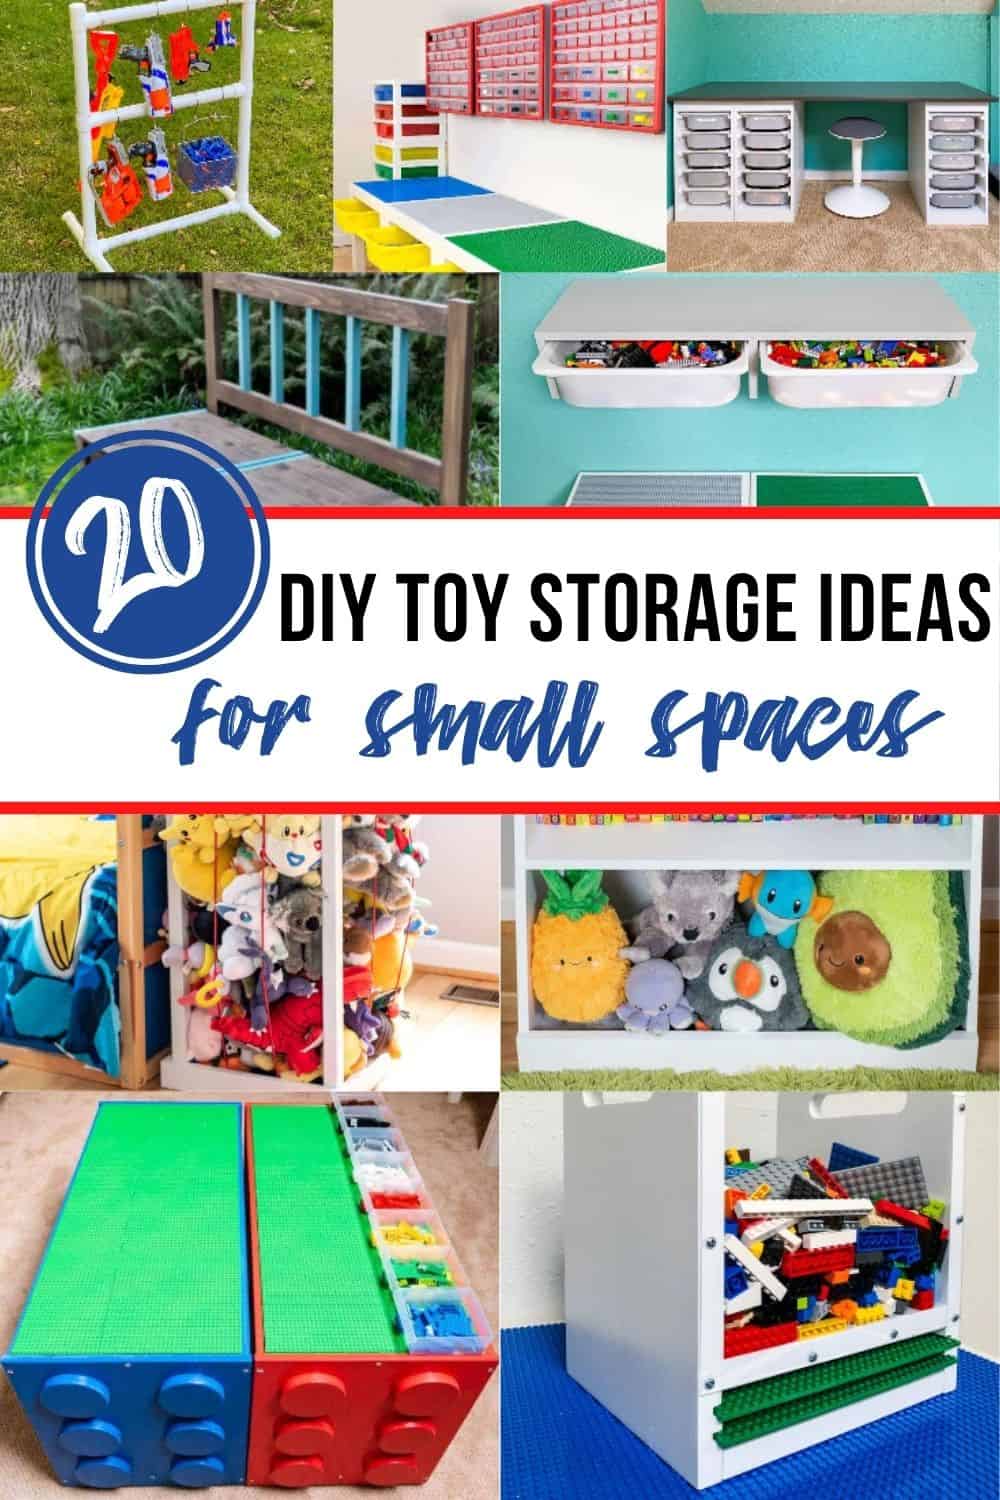 DIY Toy Storage Ideas for Small Spaces